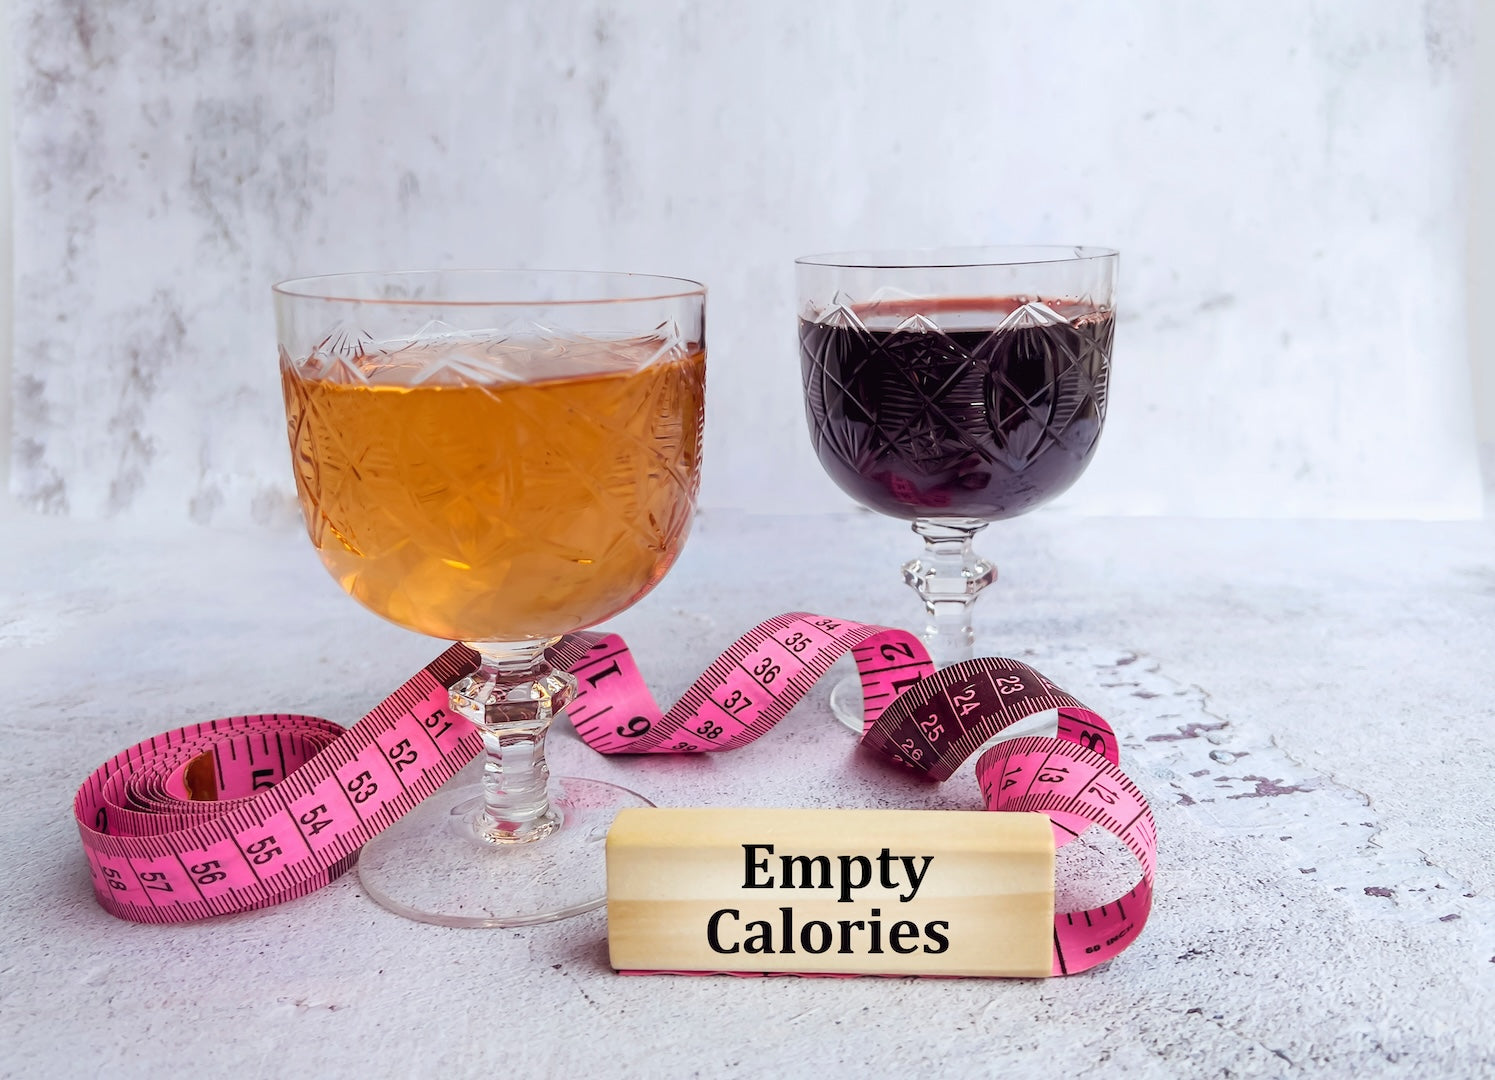 Can You Drink Alcohol After Bariatric Surgery?